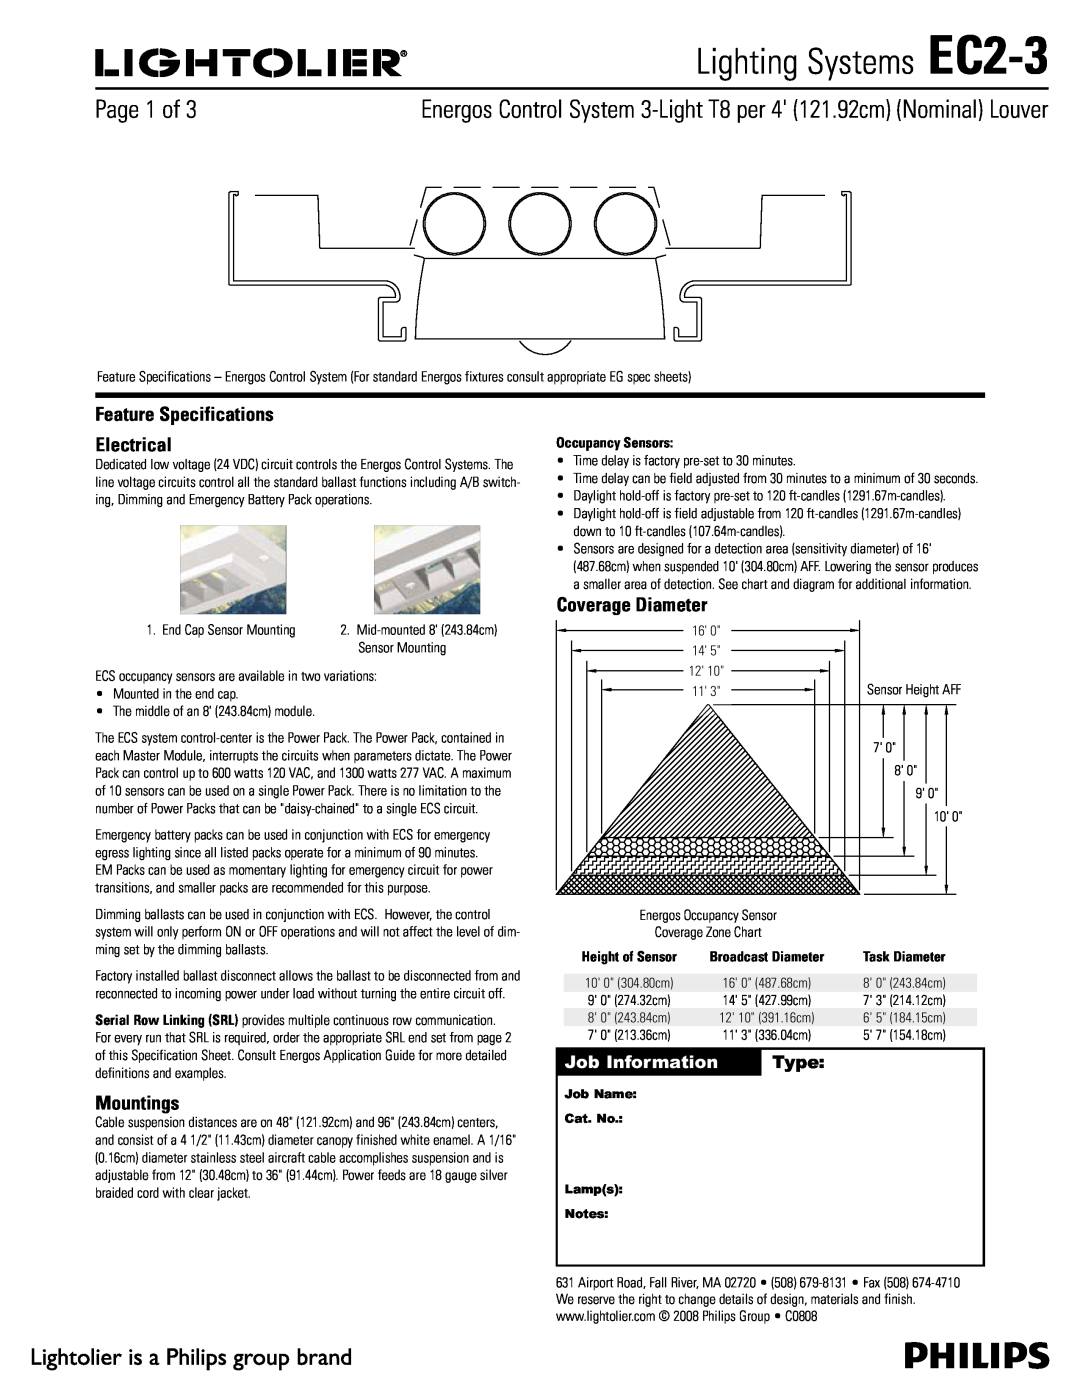 Lightolier specifications Lighting Systems EC2-3, Feature Specifications Electrical, Mountings, Coverage Diameter, Type 